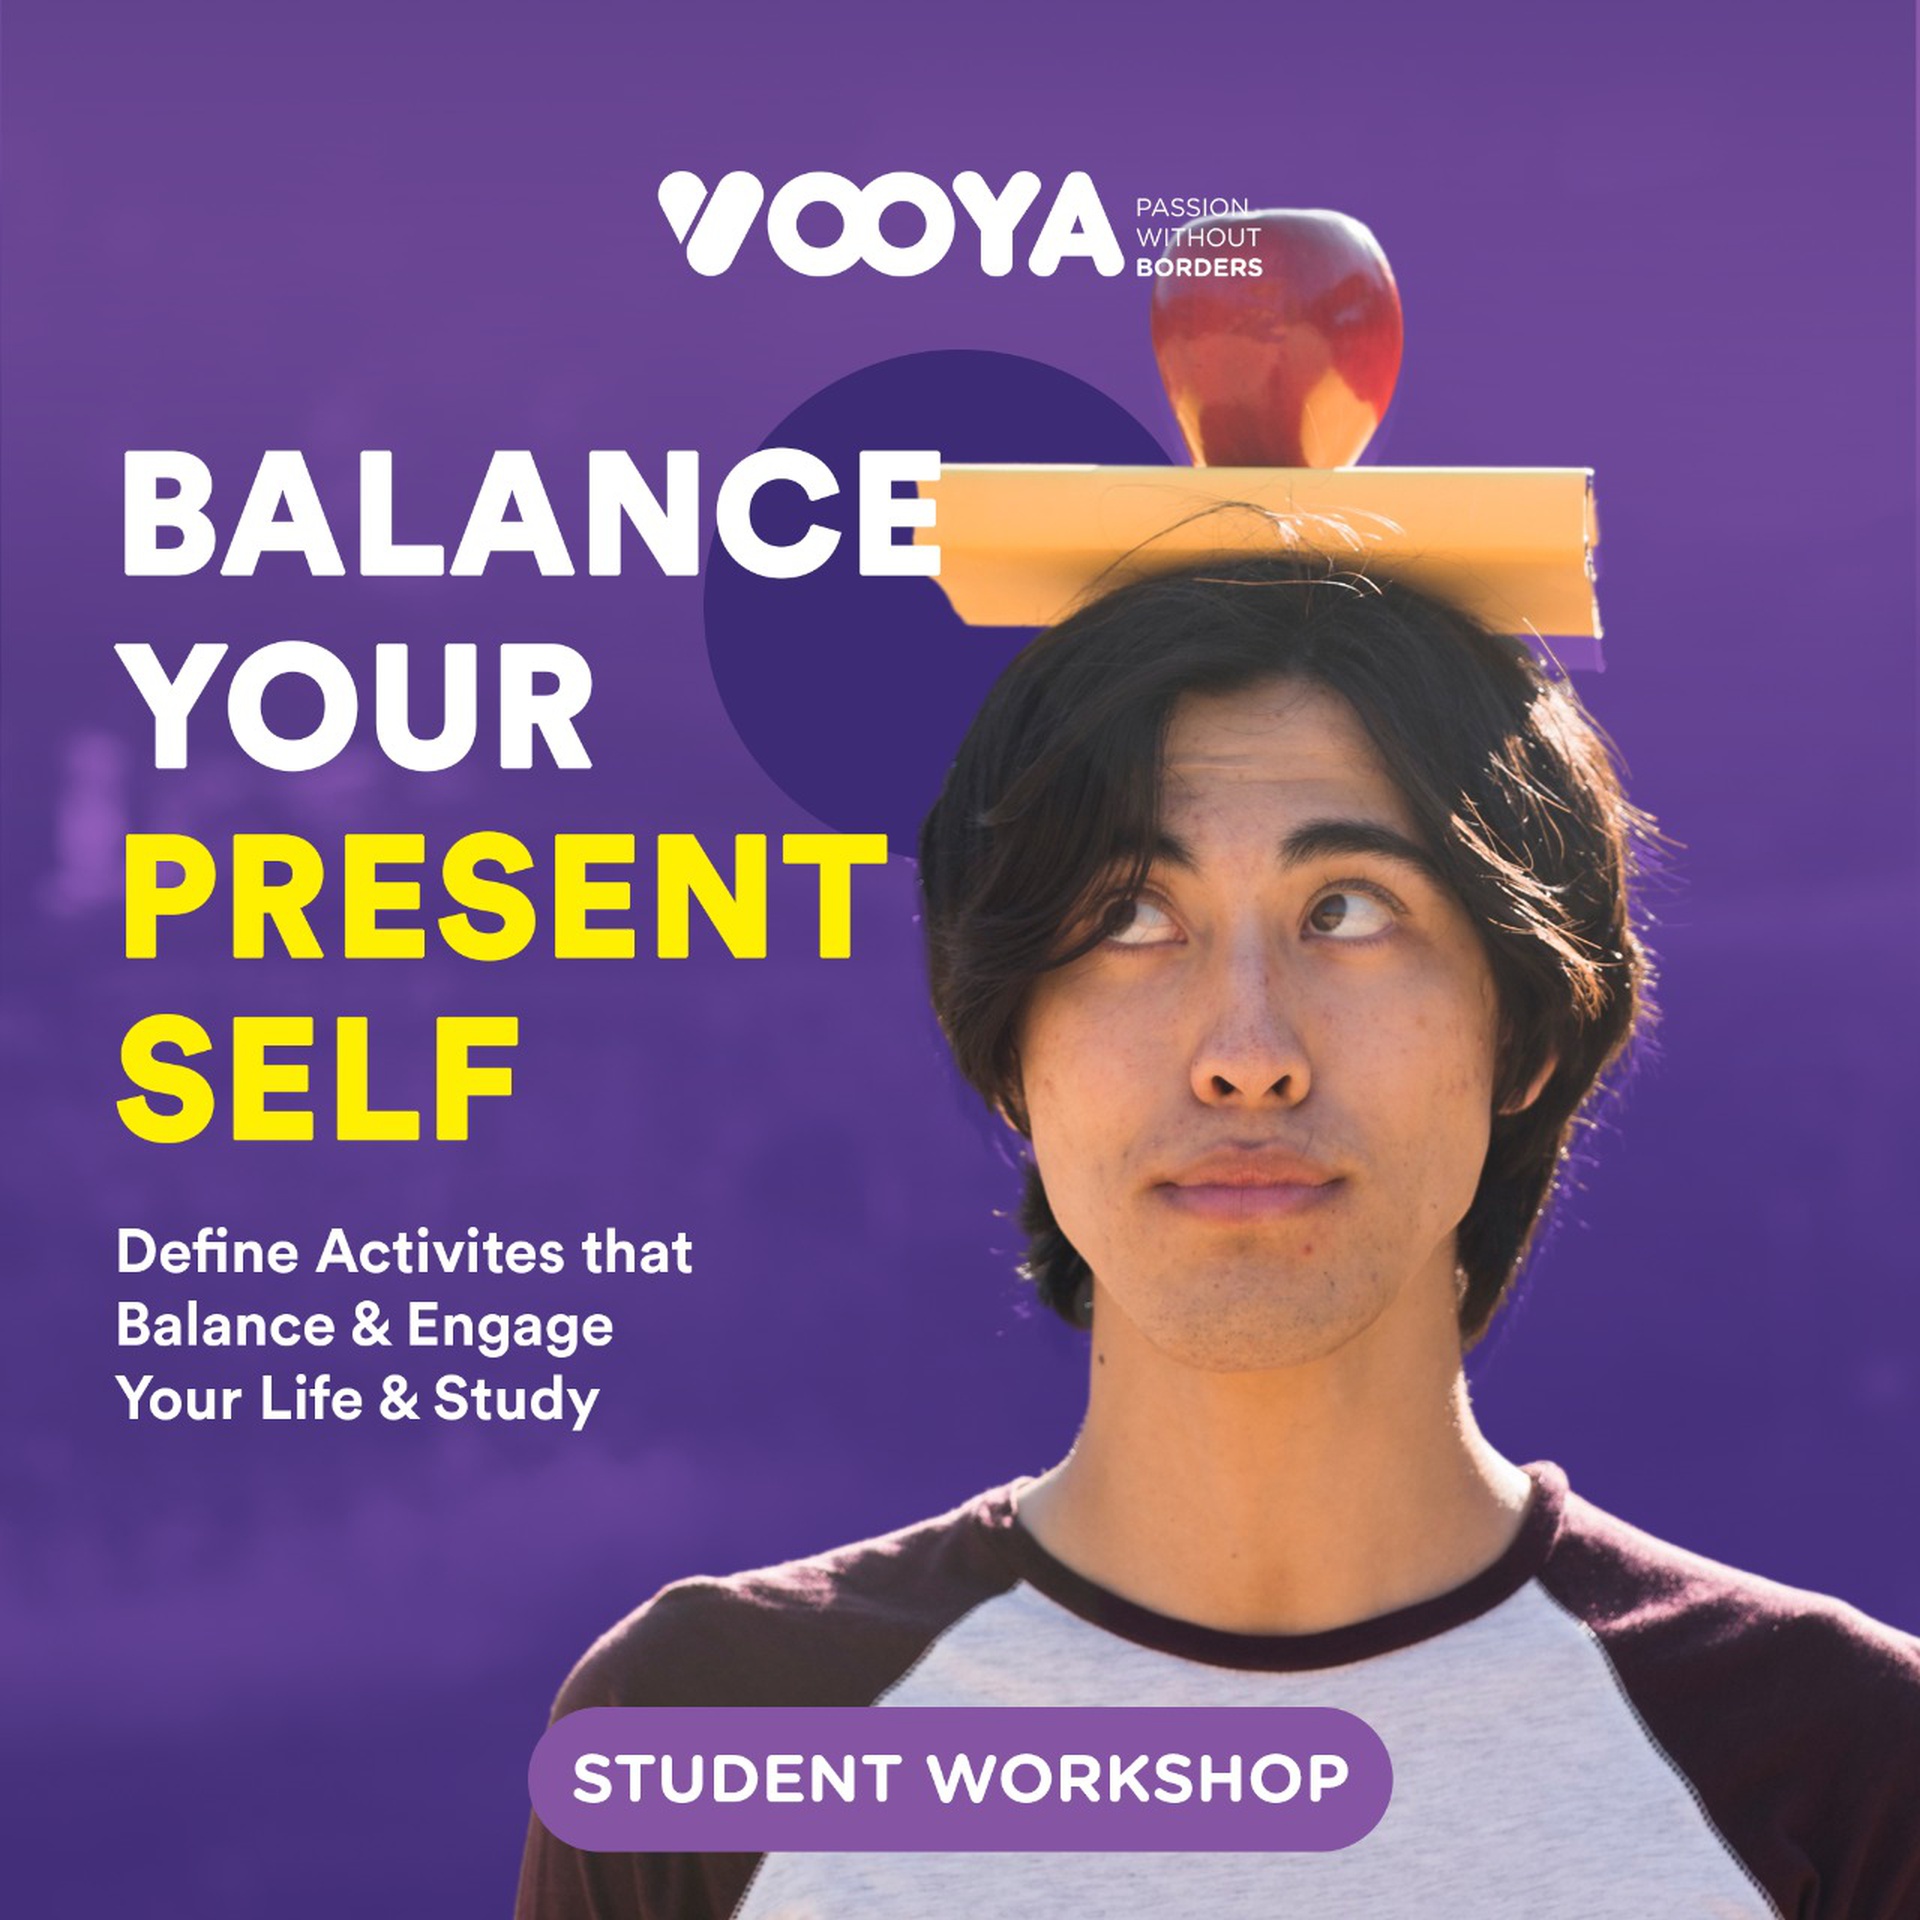 Balance Your Present Self: Define Activities that Balance & Engage Your Life & Study